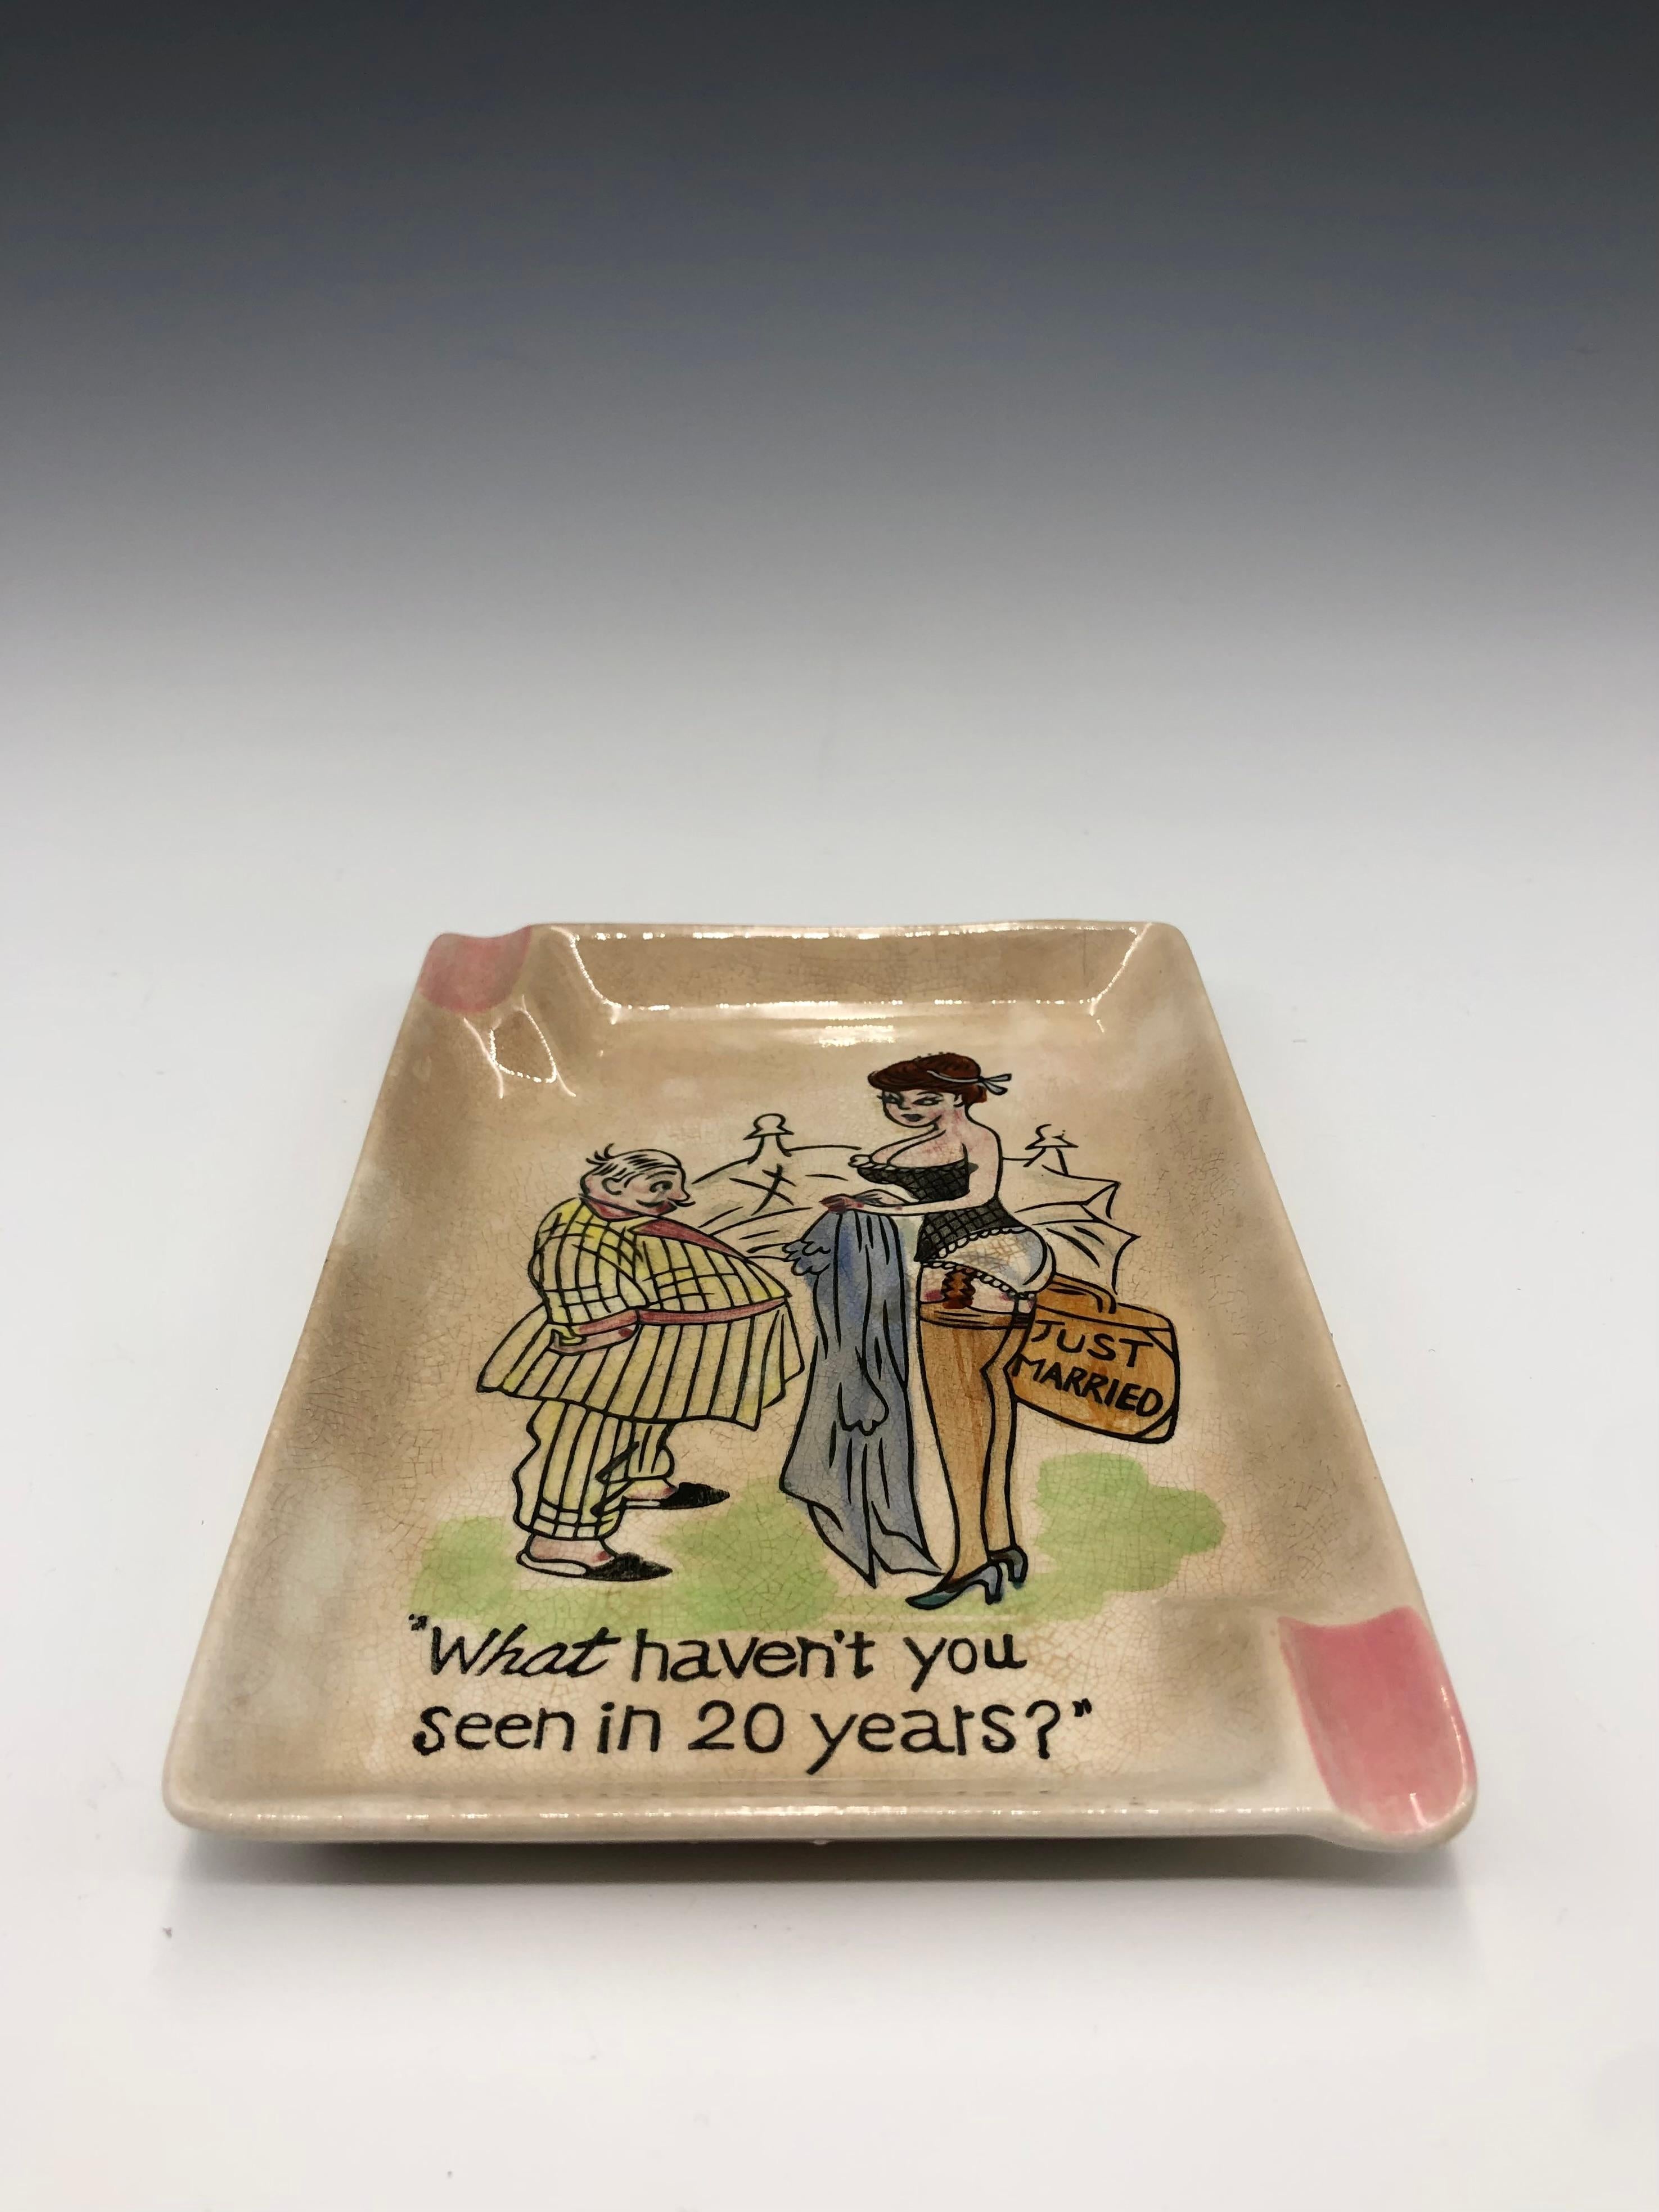 Japanese Humorous Vintage Porcelain Ashtray or Catchall For Sale